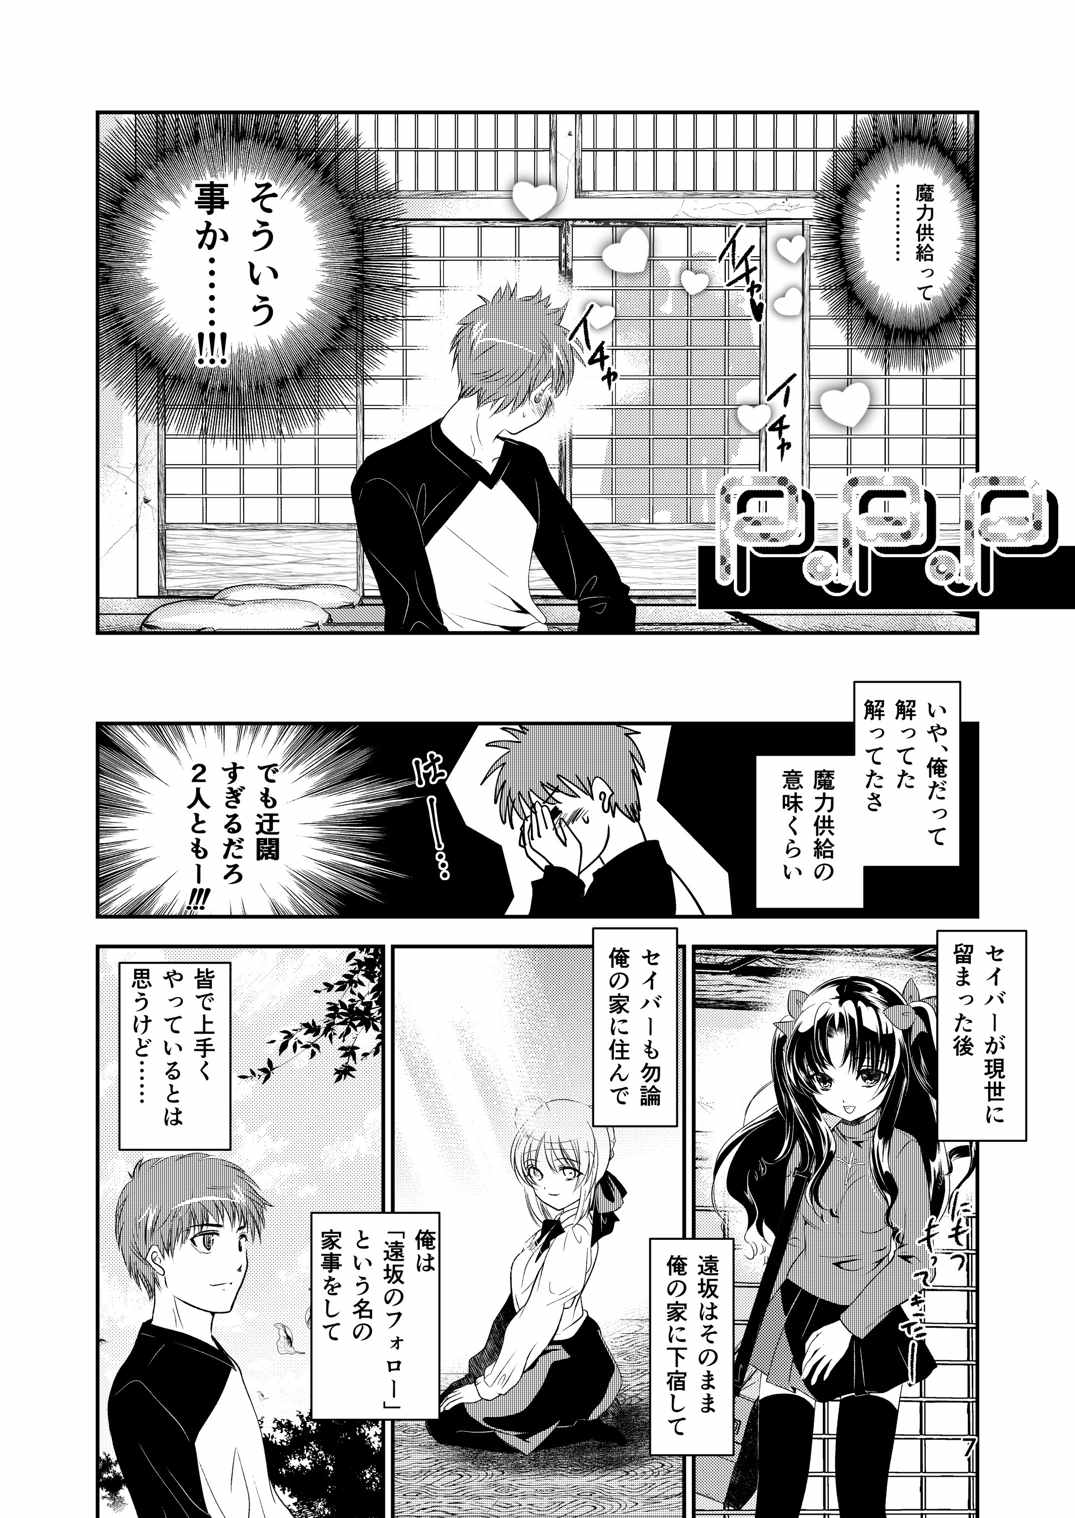 [Meiji] P.P.P (Fate/Stay Night) page 6 full